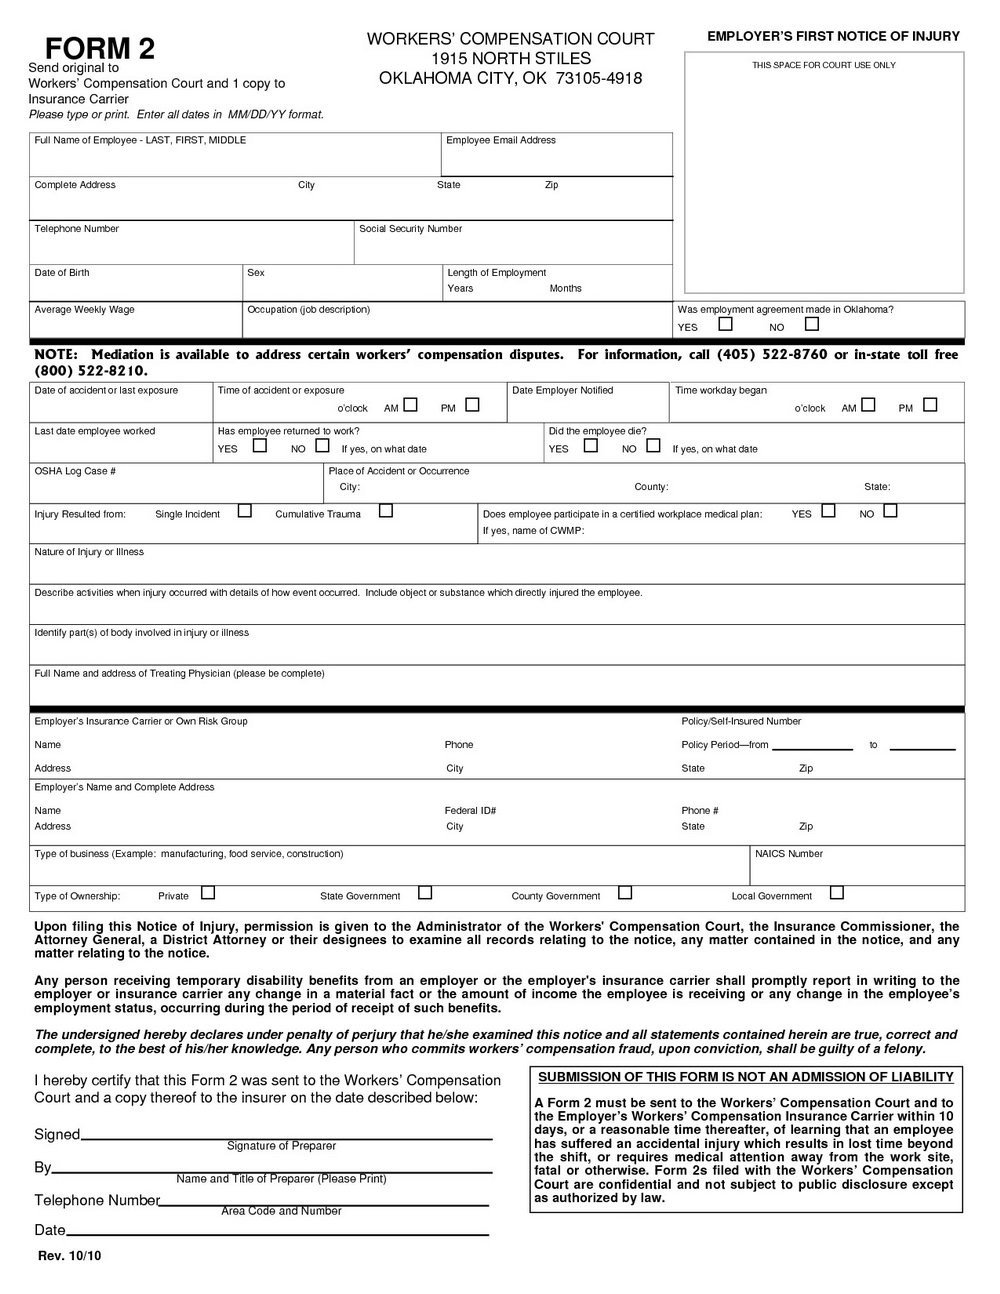 Workers Comp Exemption form Michigan Workers Pensation Waiver form forms 6117